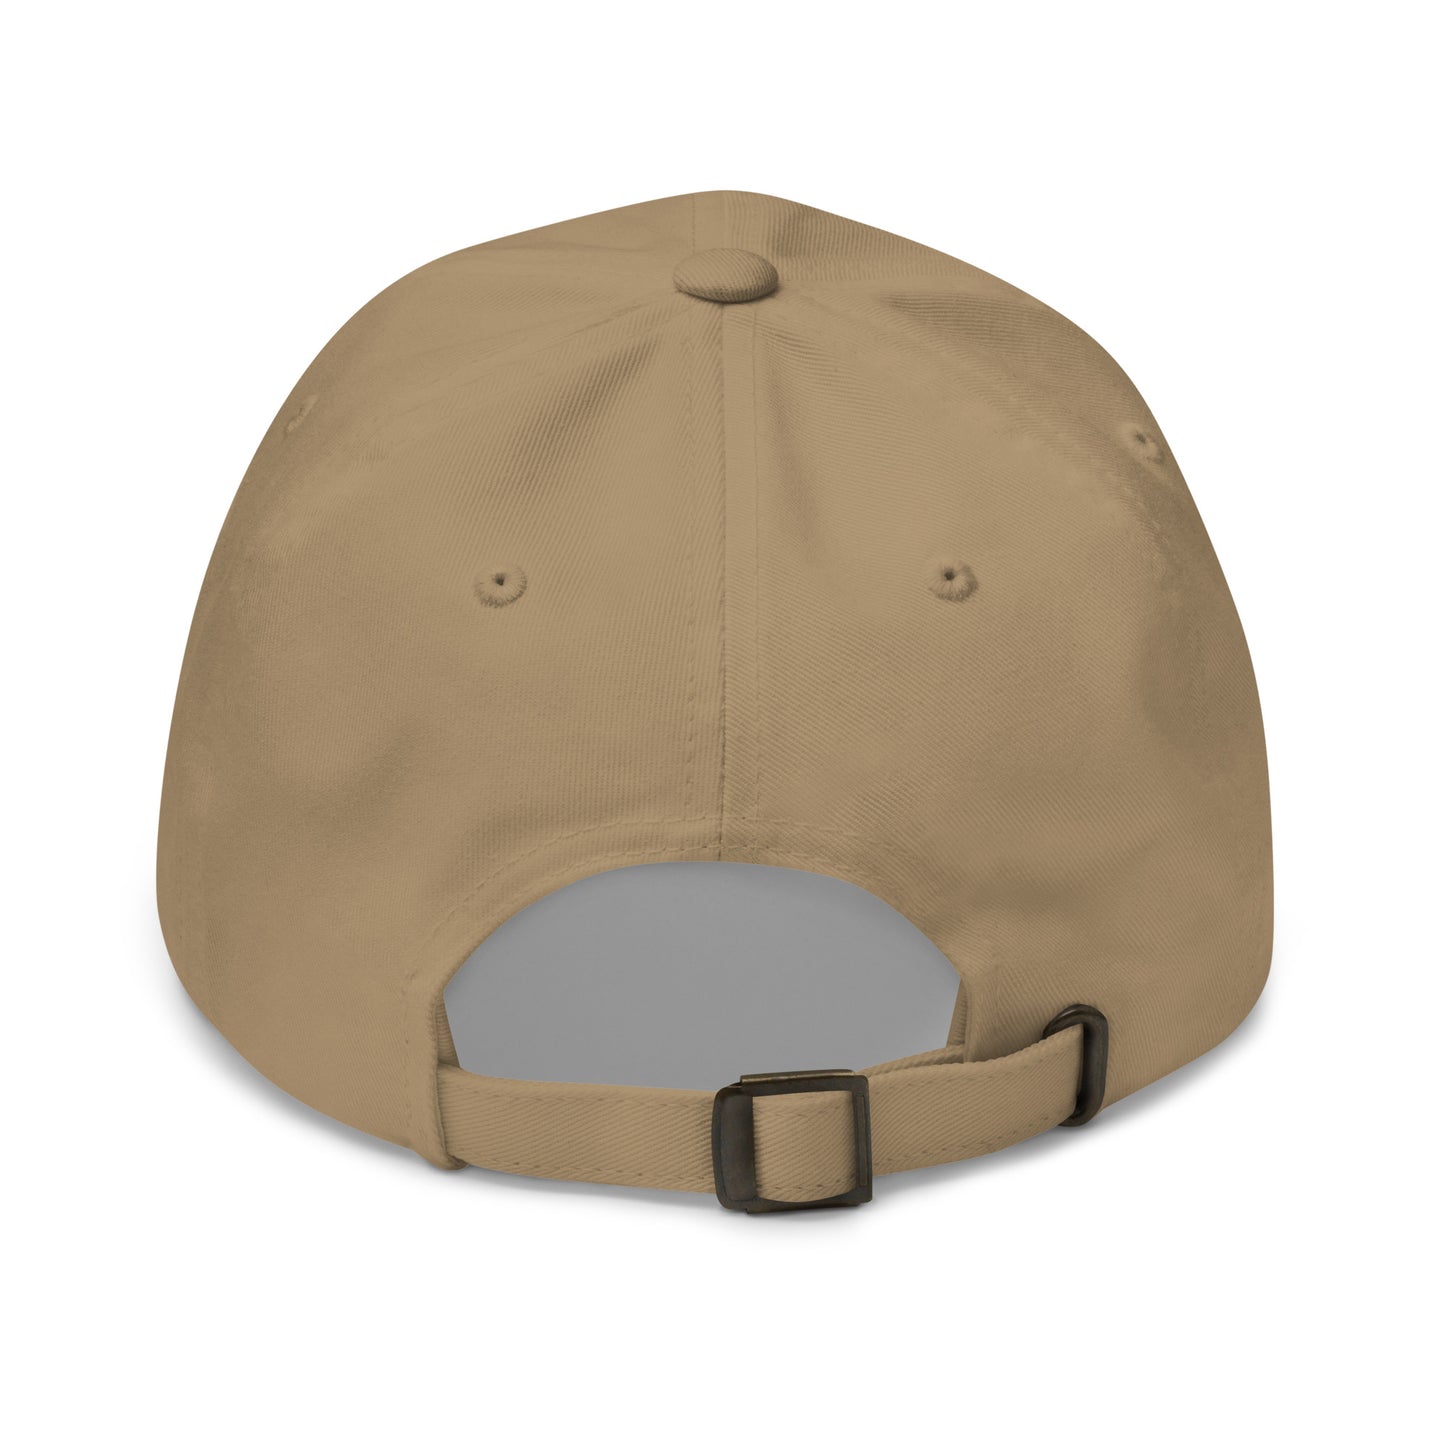 Wildfire Cigars embroidered khaki dad hat facing the back